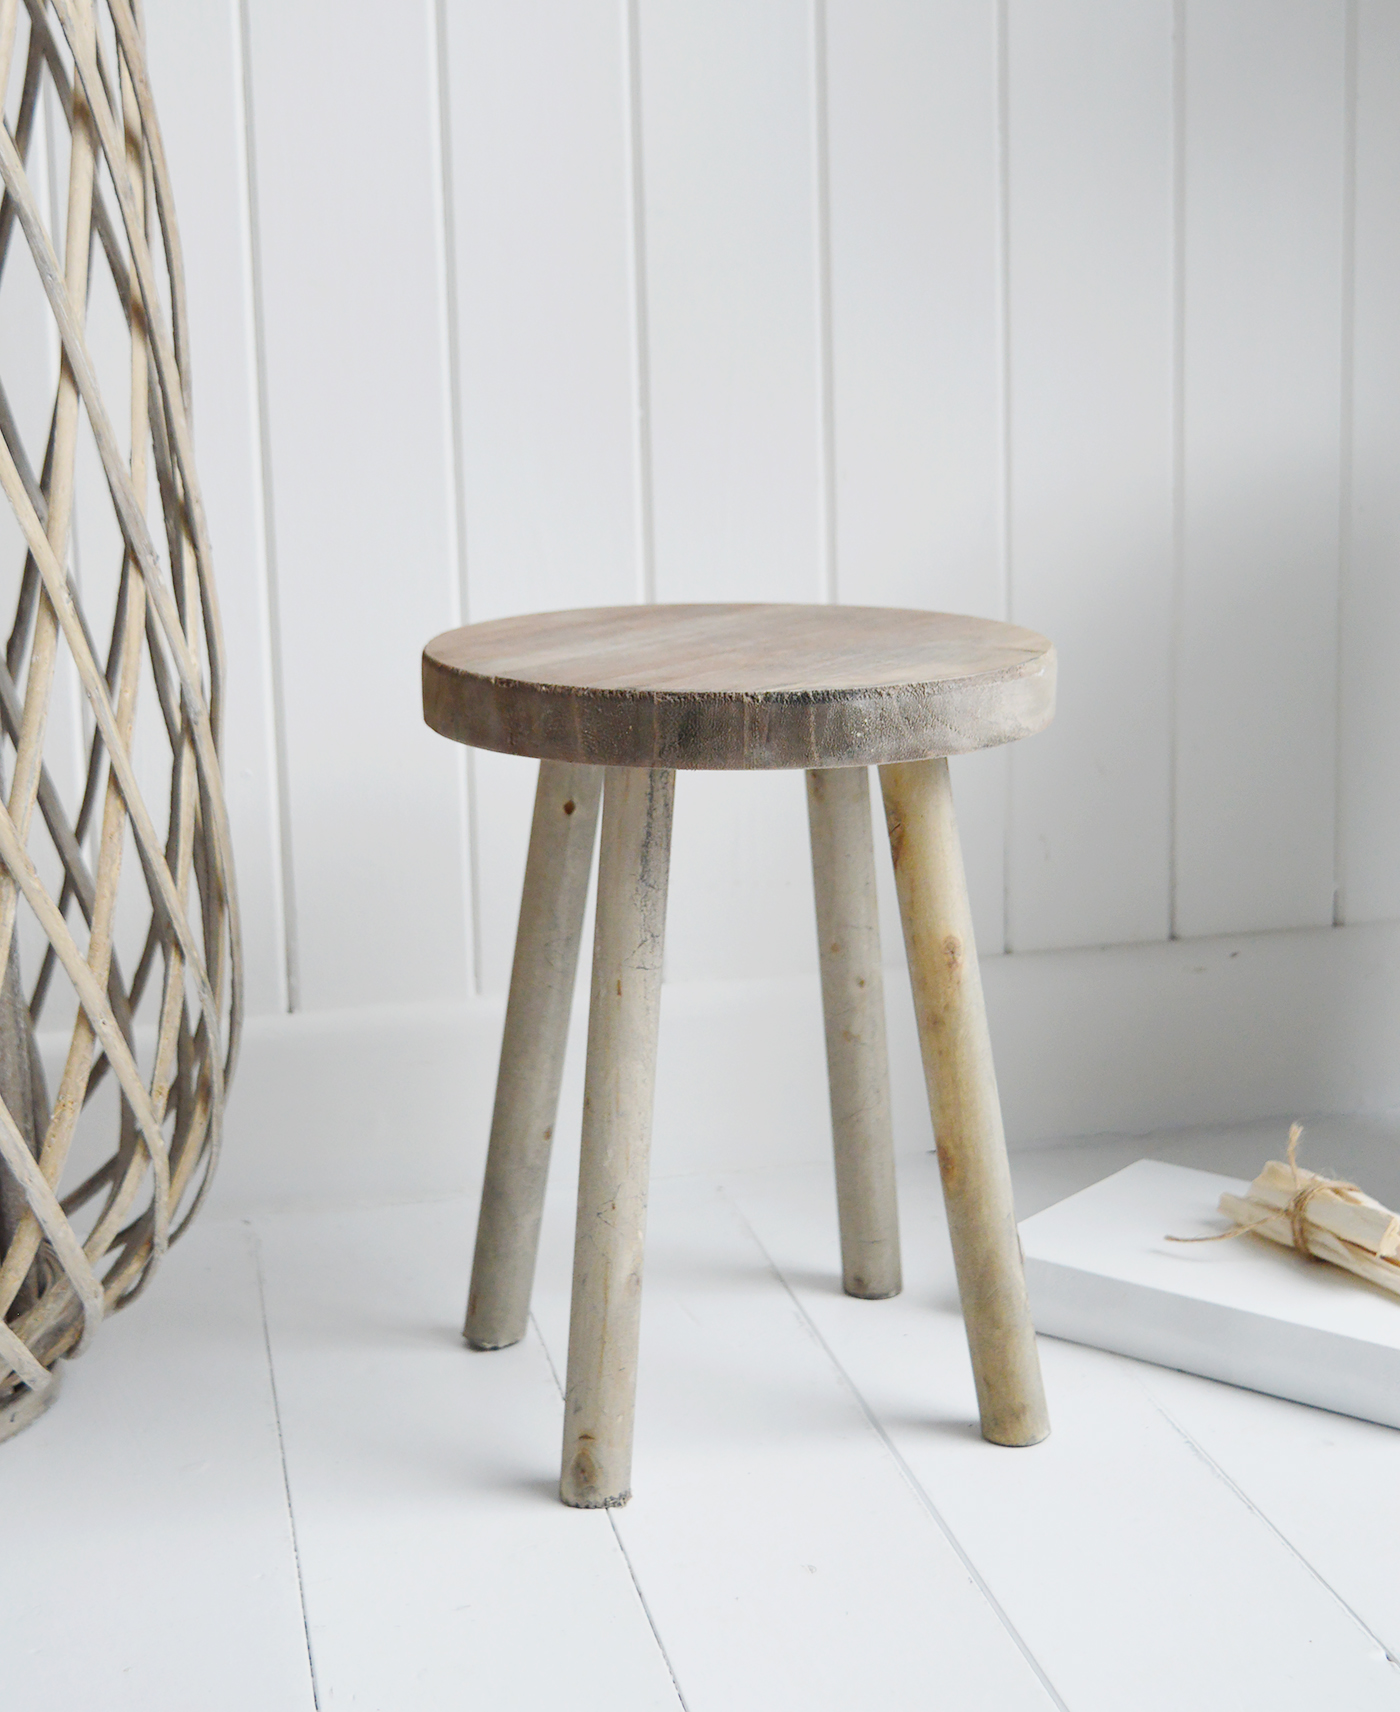 Round Wooden Stool Side Table, Round Wood Stool